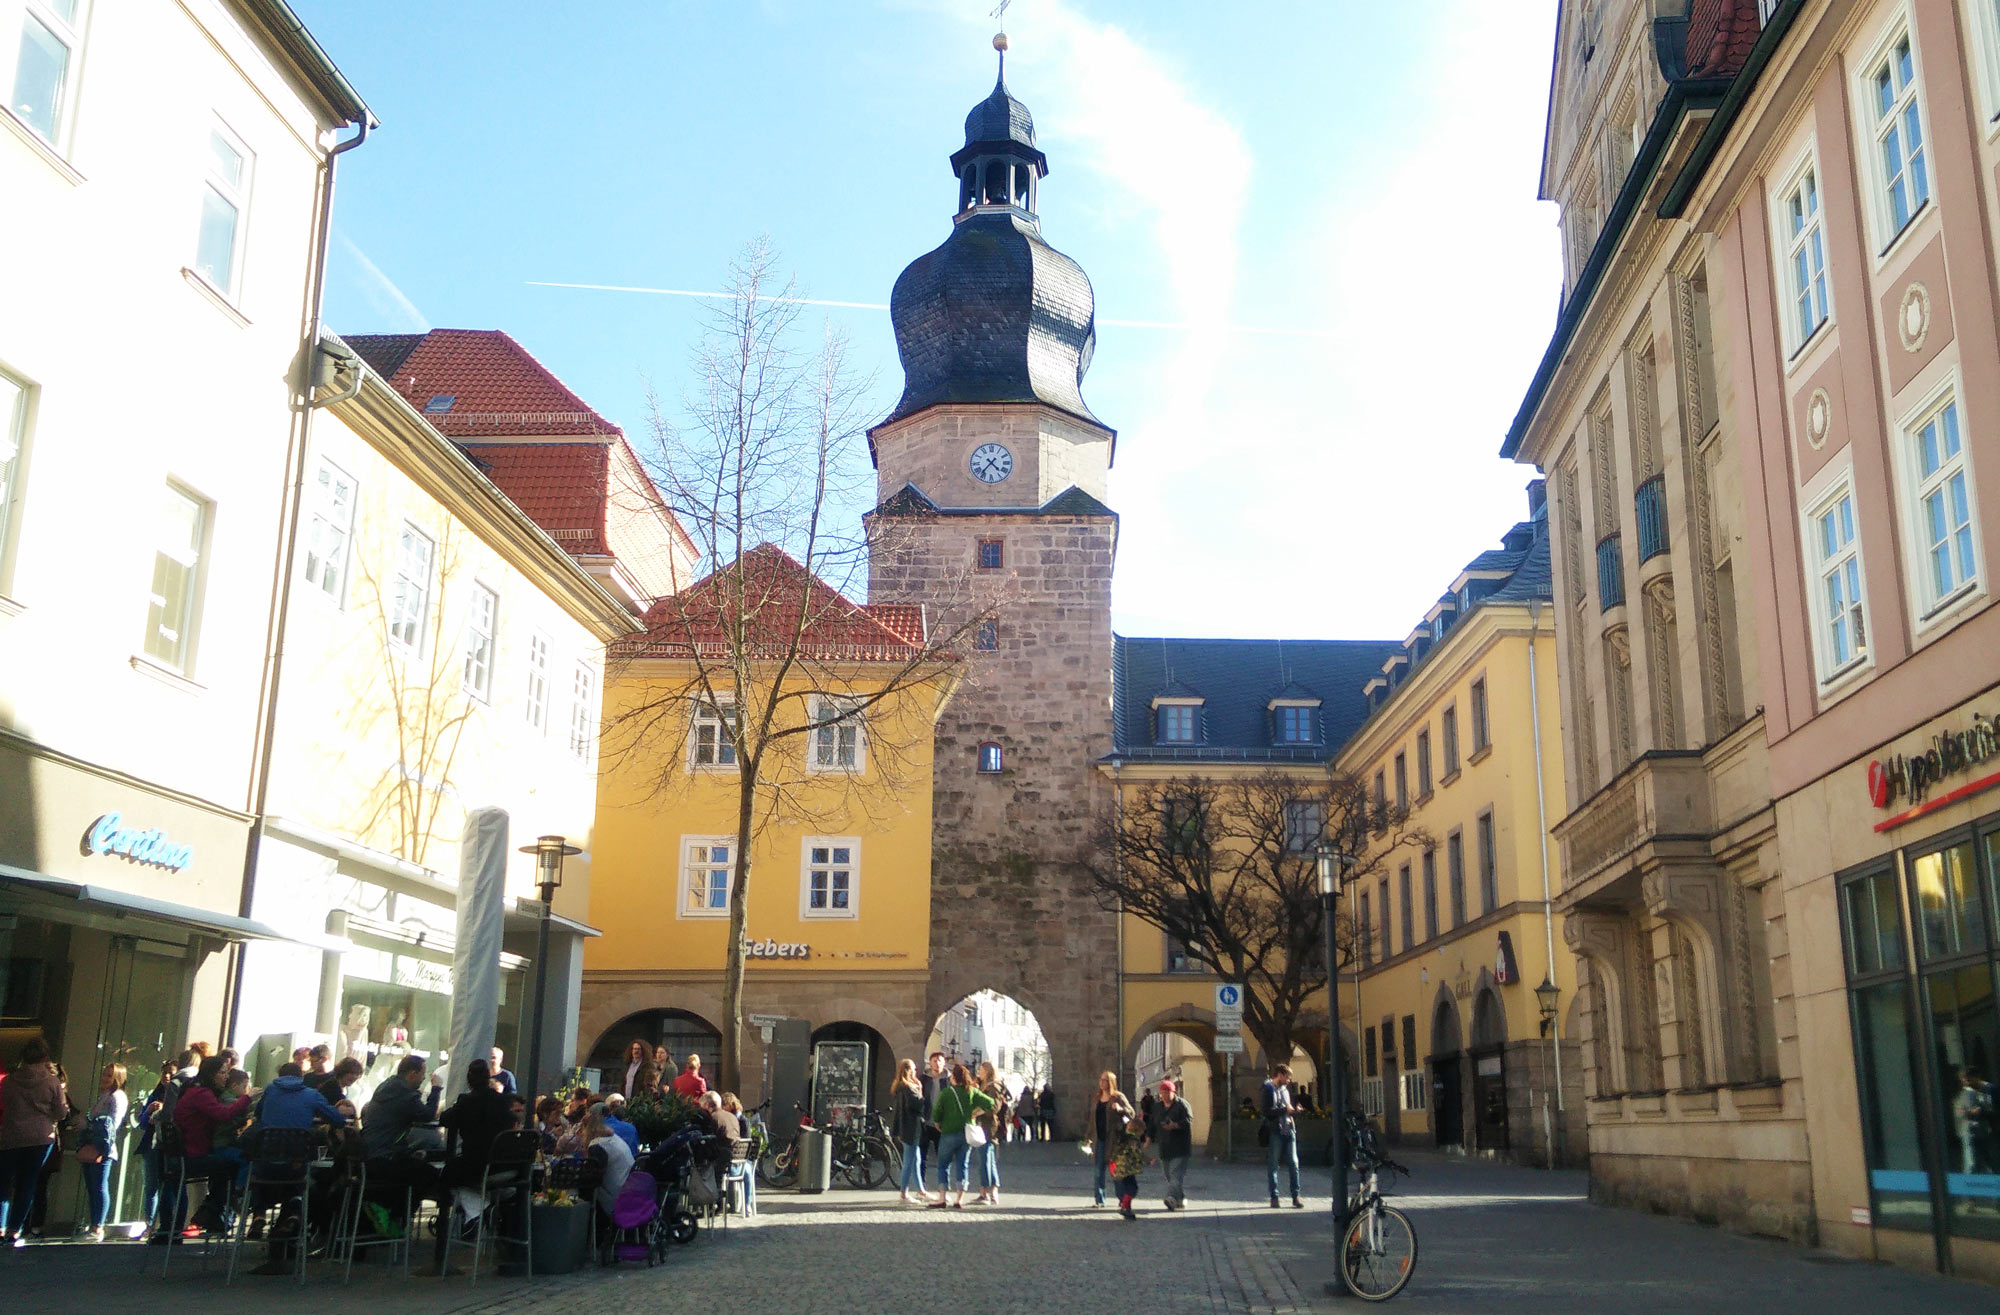 hospital gate Spitaltor in the medieval town wall of Coburg